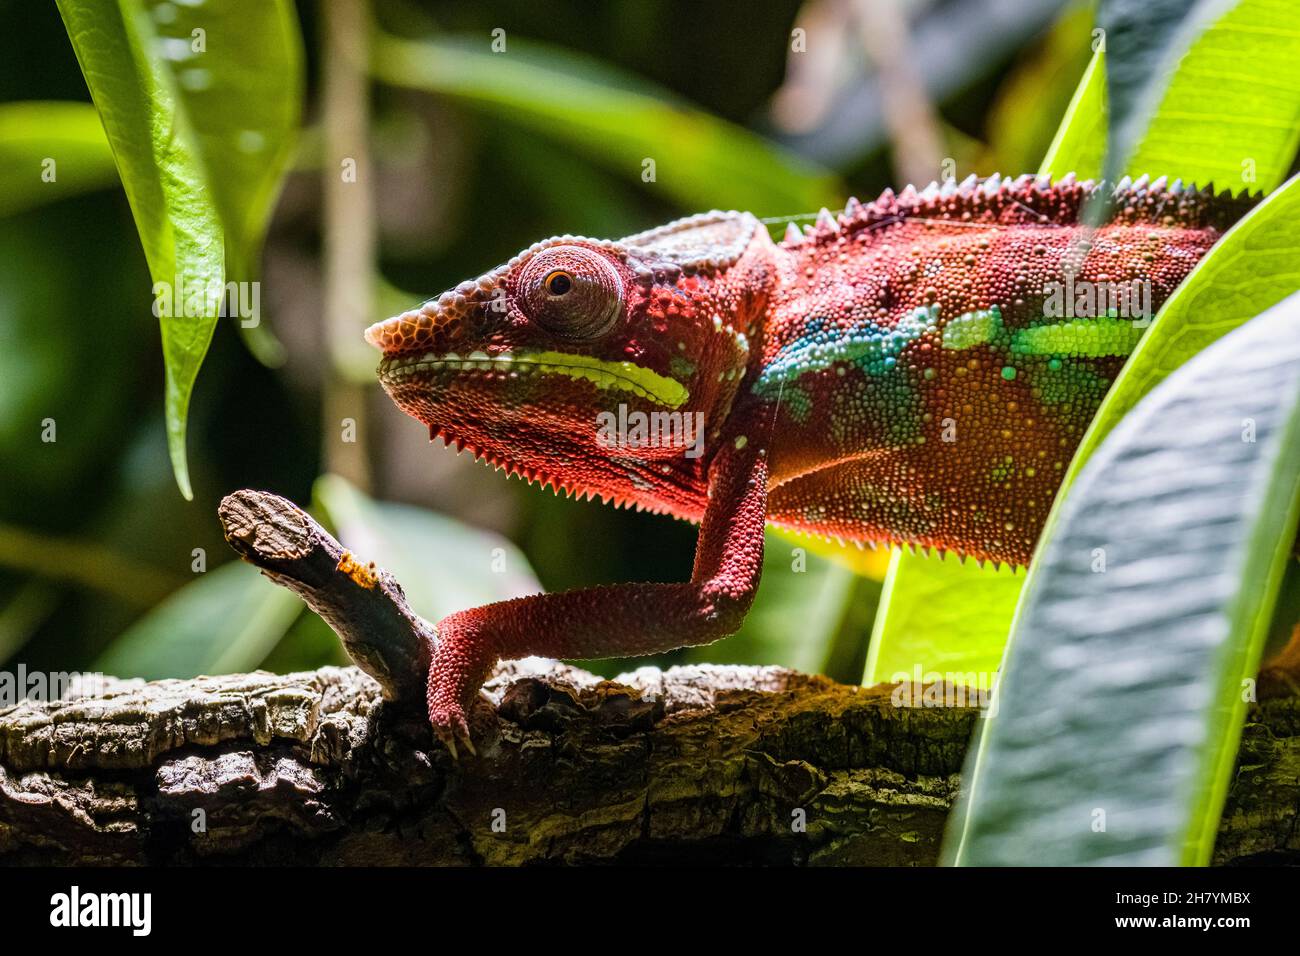 A Panther chameleon (Furcifer pardalis) walking on a branch of a tree with green leafes. Stock Photo